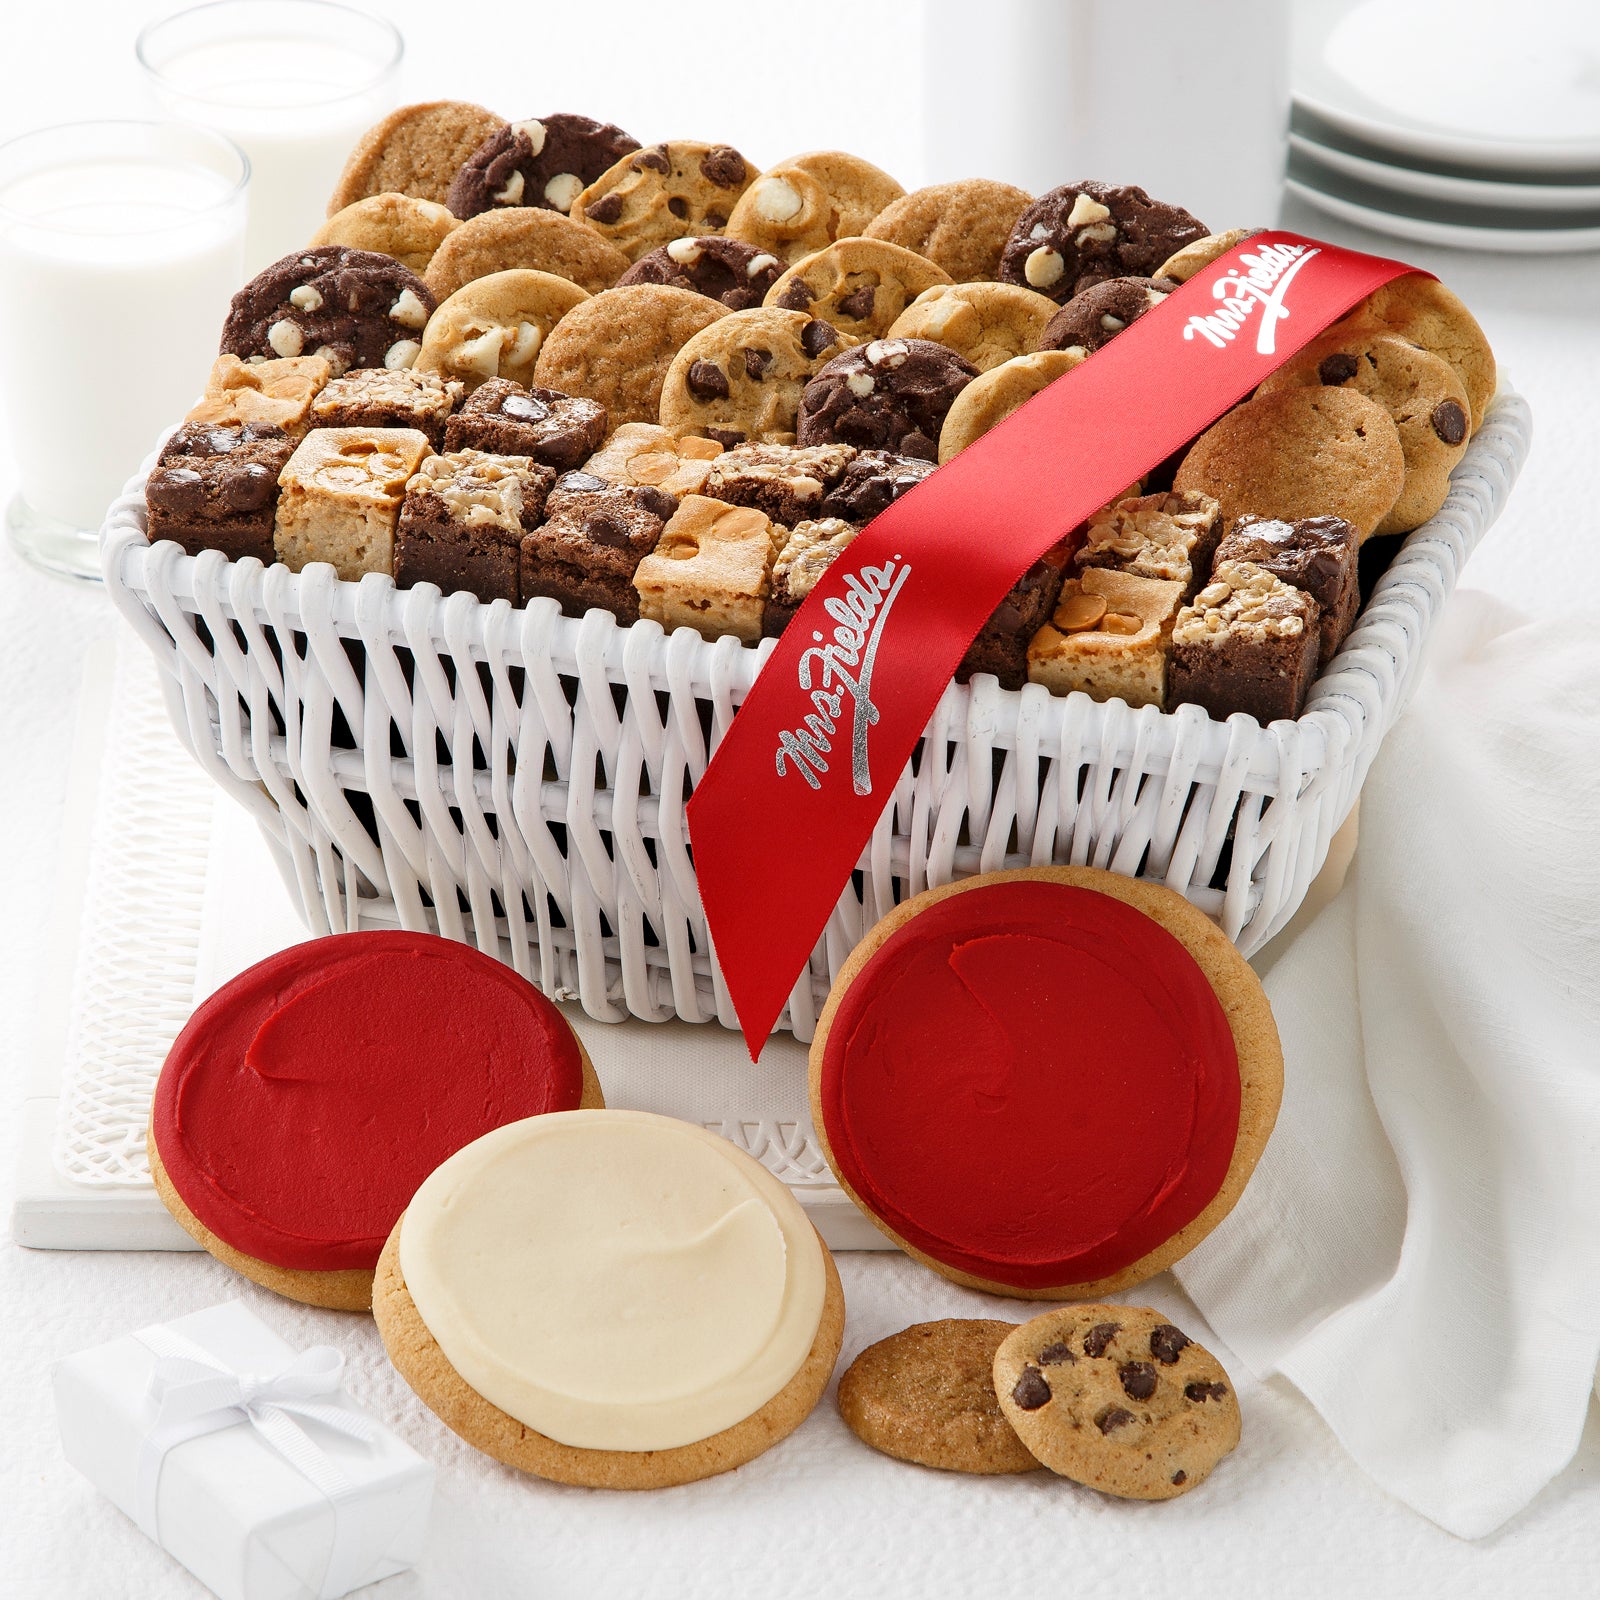 A white gift basket filled with an assortment of nibblers, brownie bites, and red and white frosted round cookies